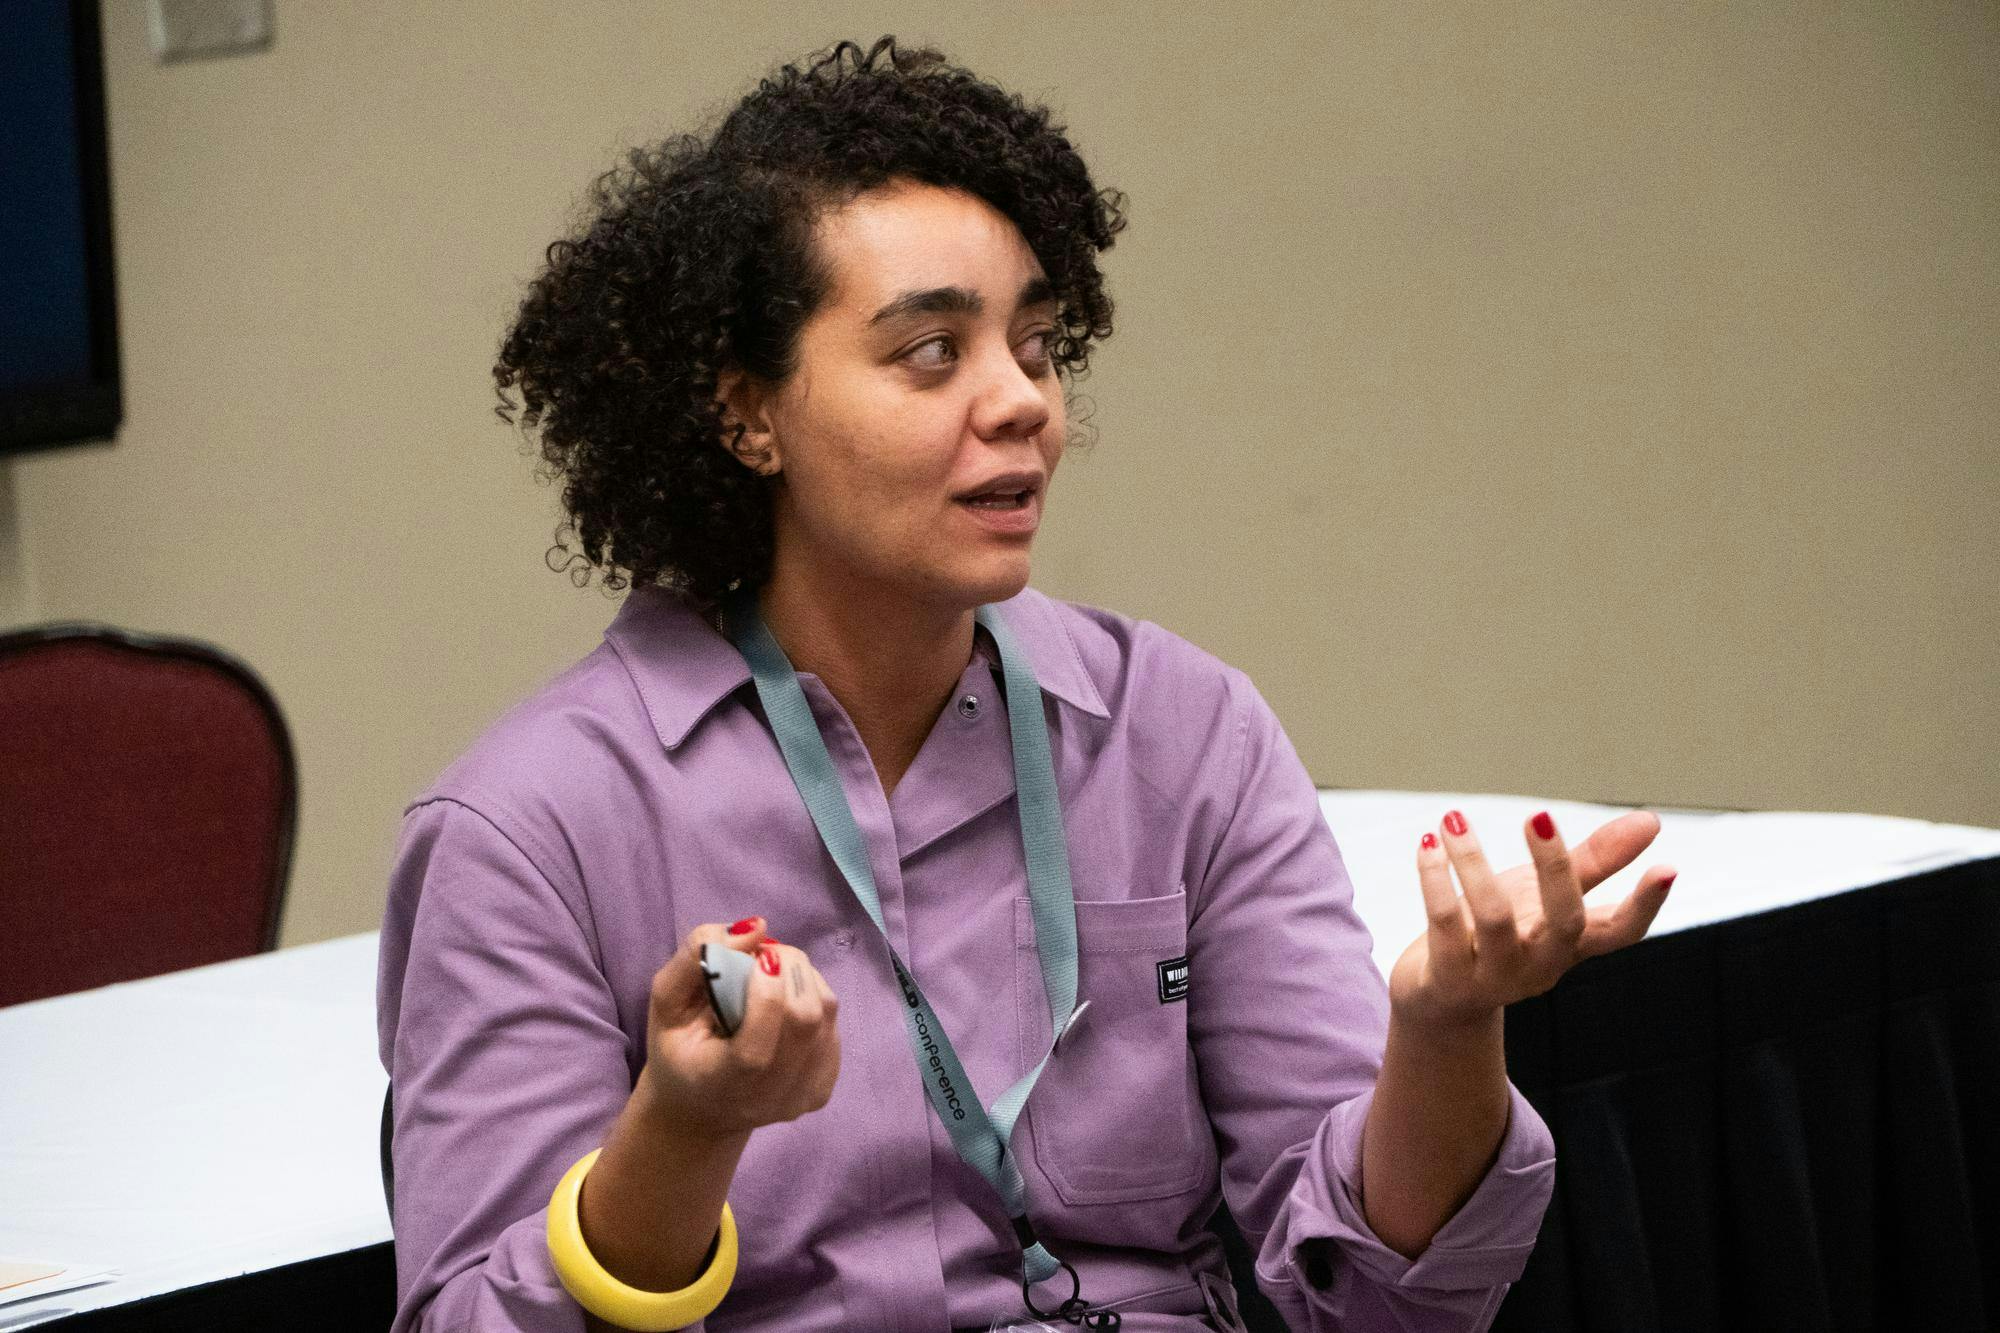 Autumn Brown presents "A Multiracial Movement for the Win" at the Women*s Initiative for Leadership Development (WILD) Conference on Nov. 12, 2023 at the MSU Union building.